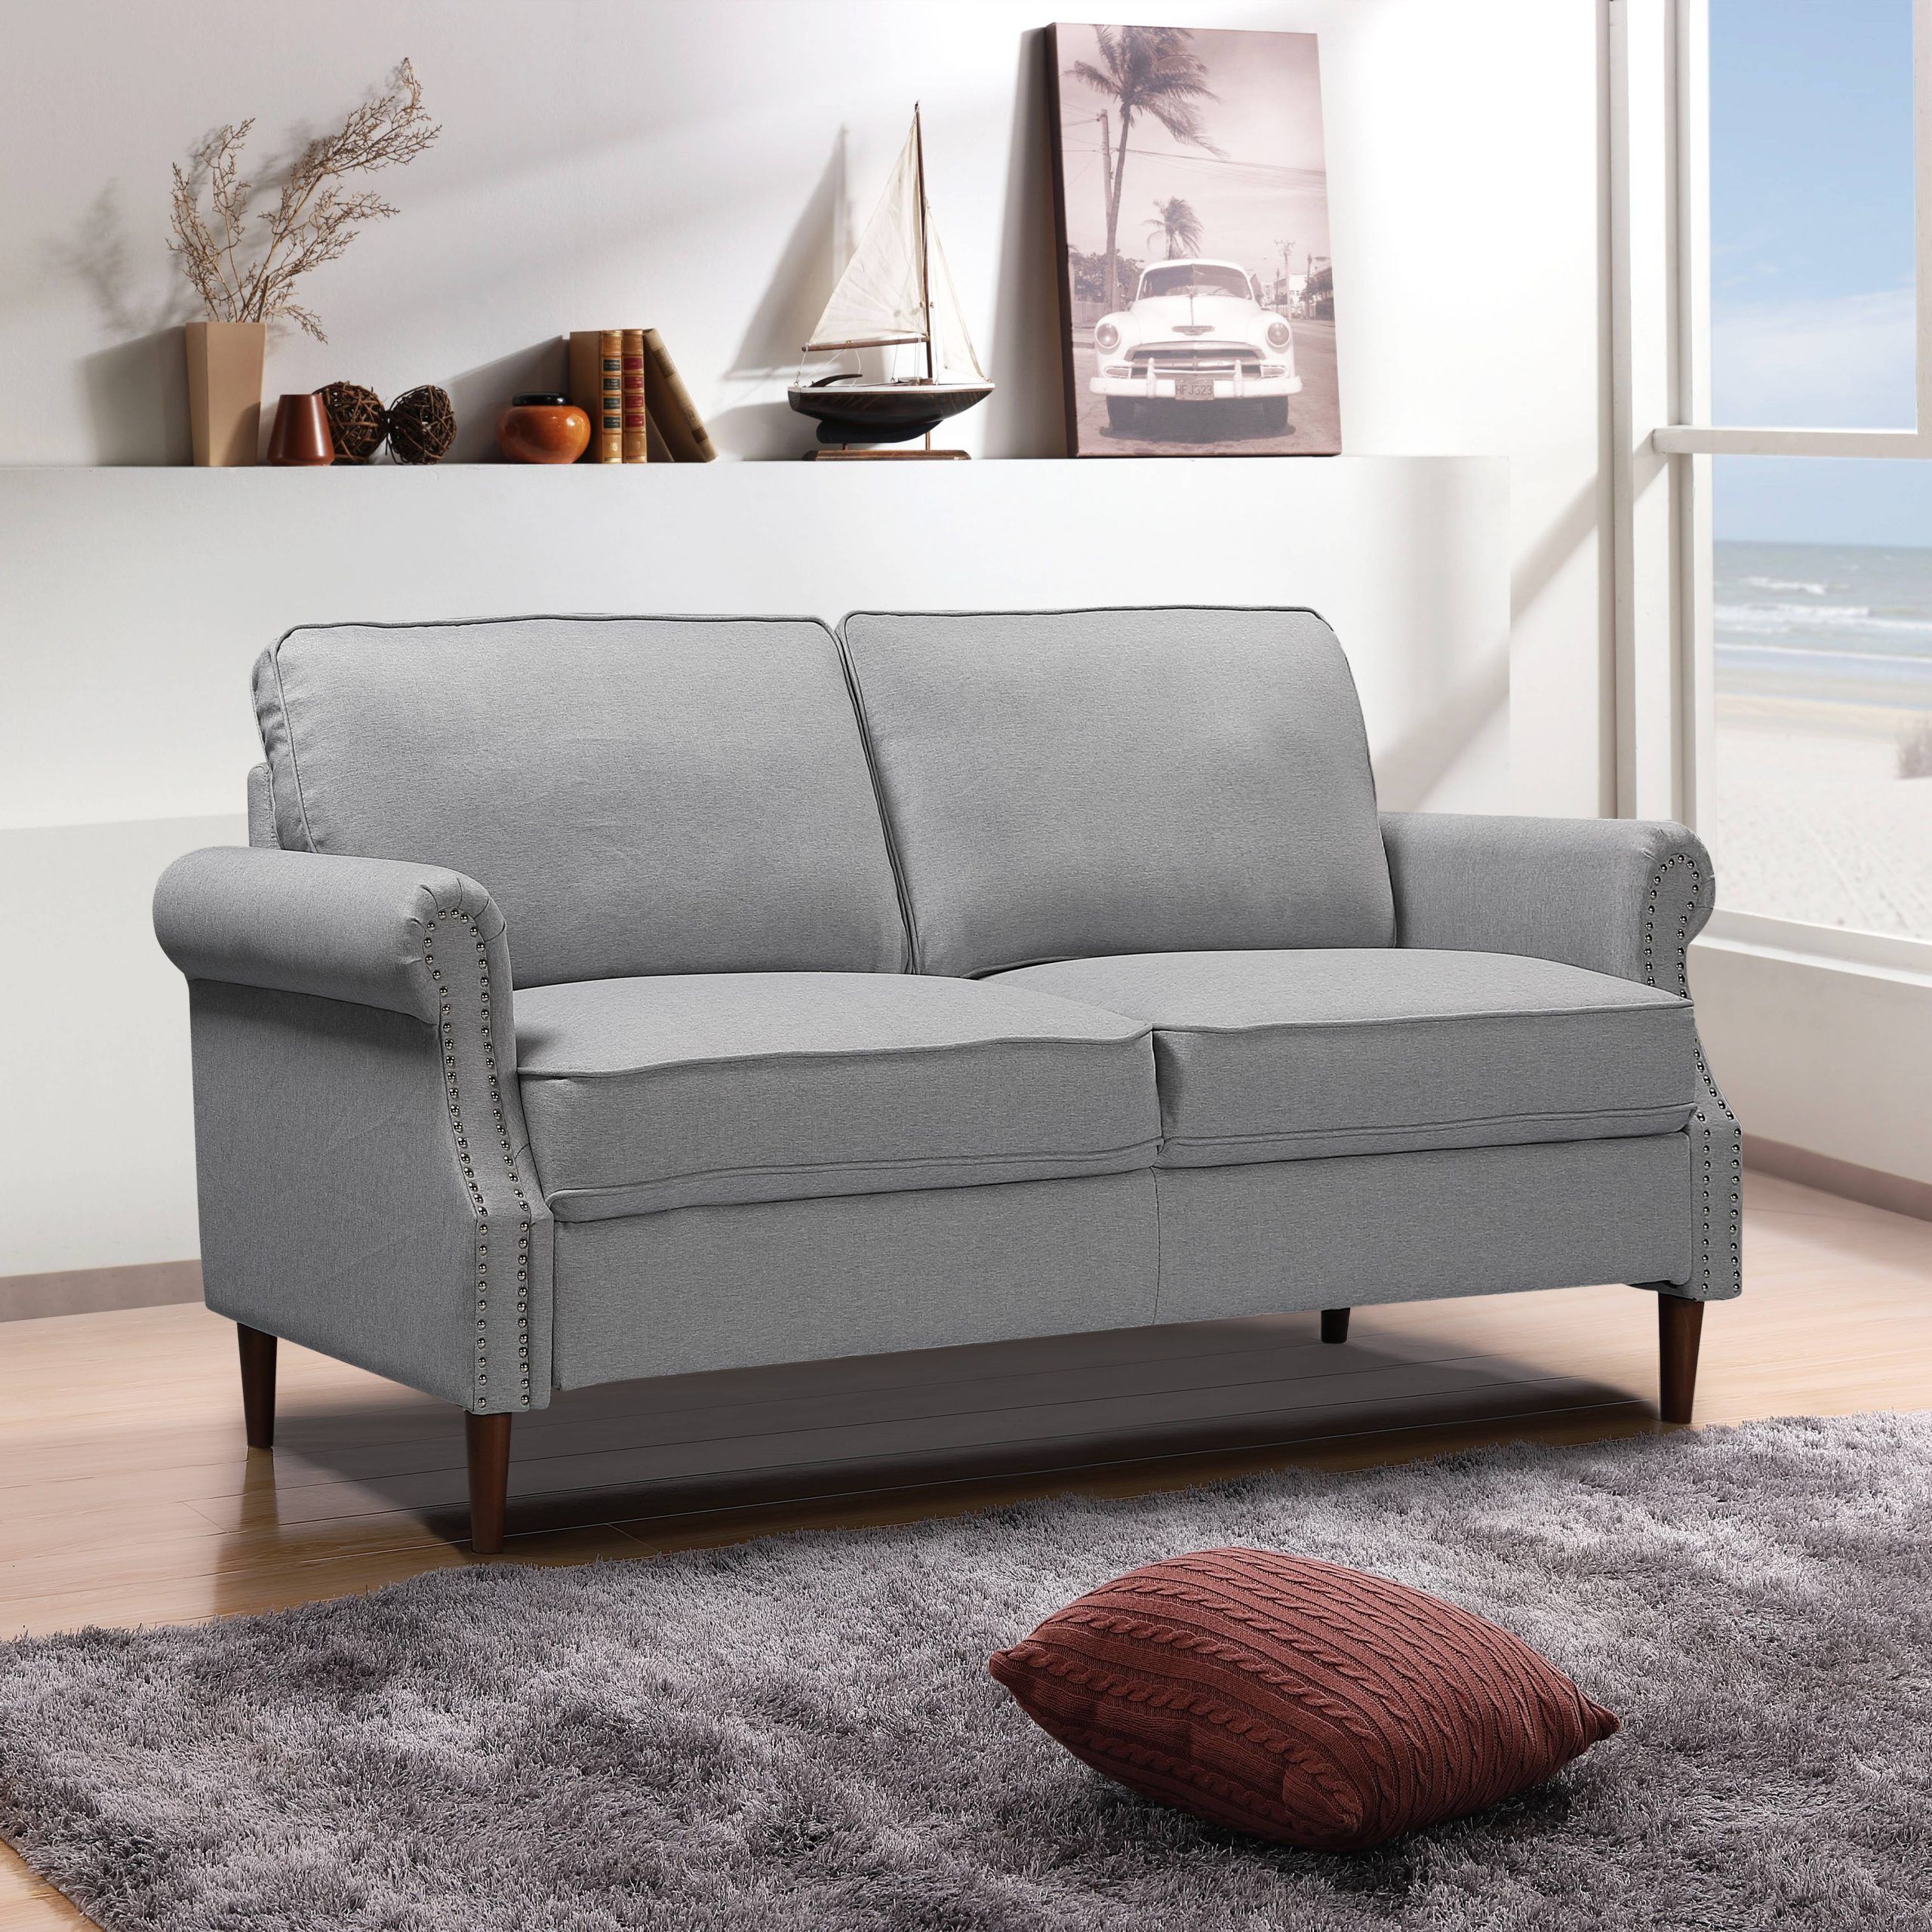 Sofas For Small Spaces Within Well Liked Gray Loveseat, Modern Linen Farbic Sofas For Small Spaces, Upholstered (View 14 of 15)